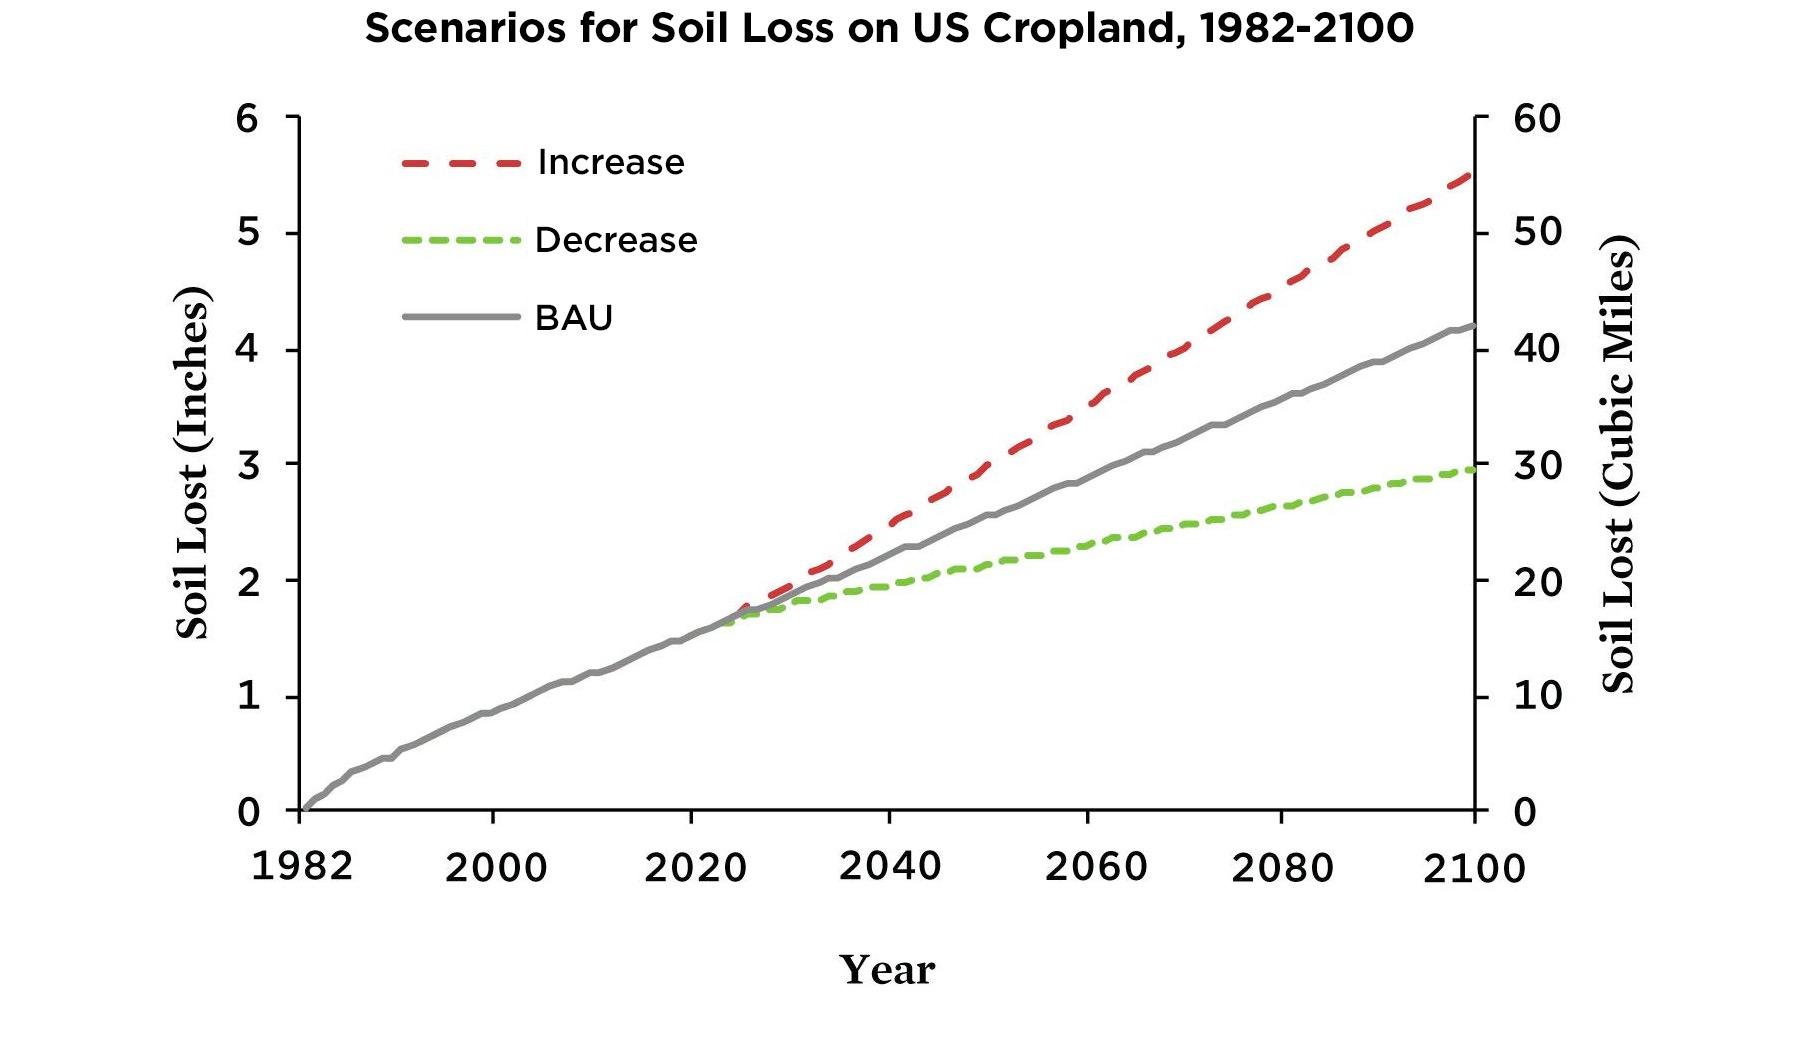 Graph showing potential soil losses due to erosion by 2100 under different farm practices scenarios